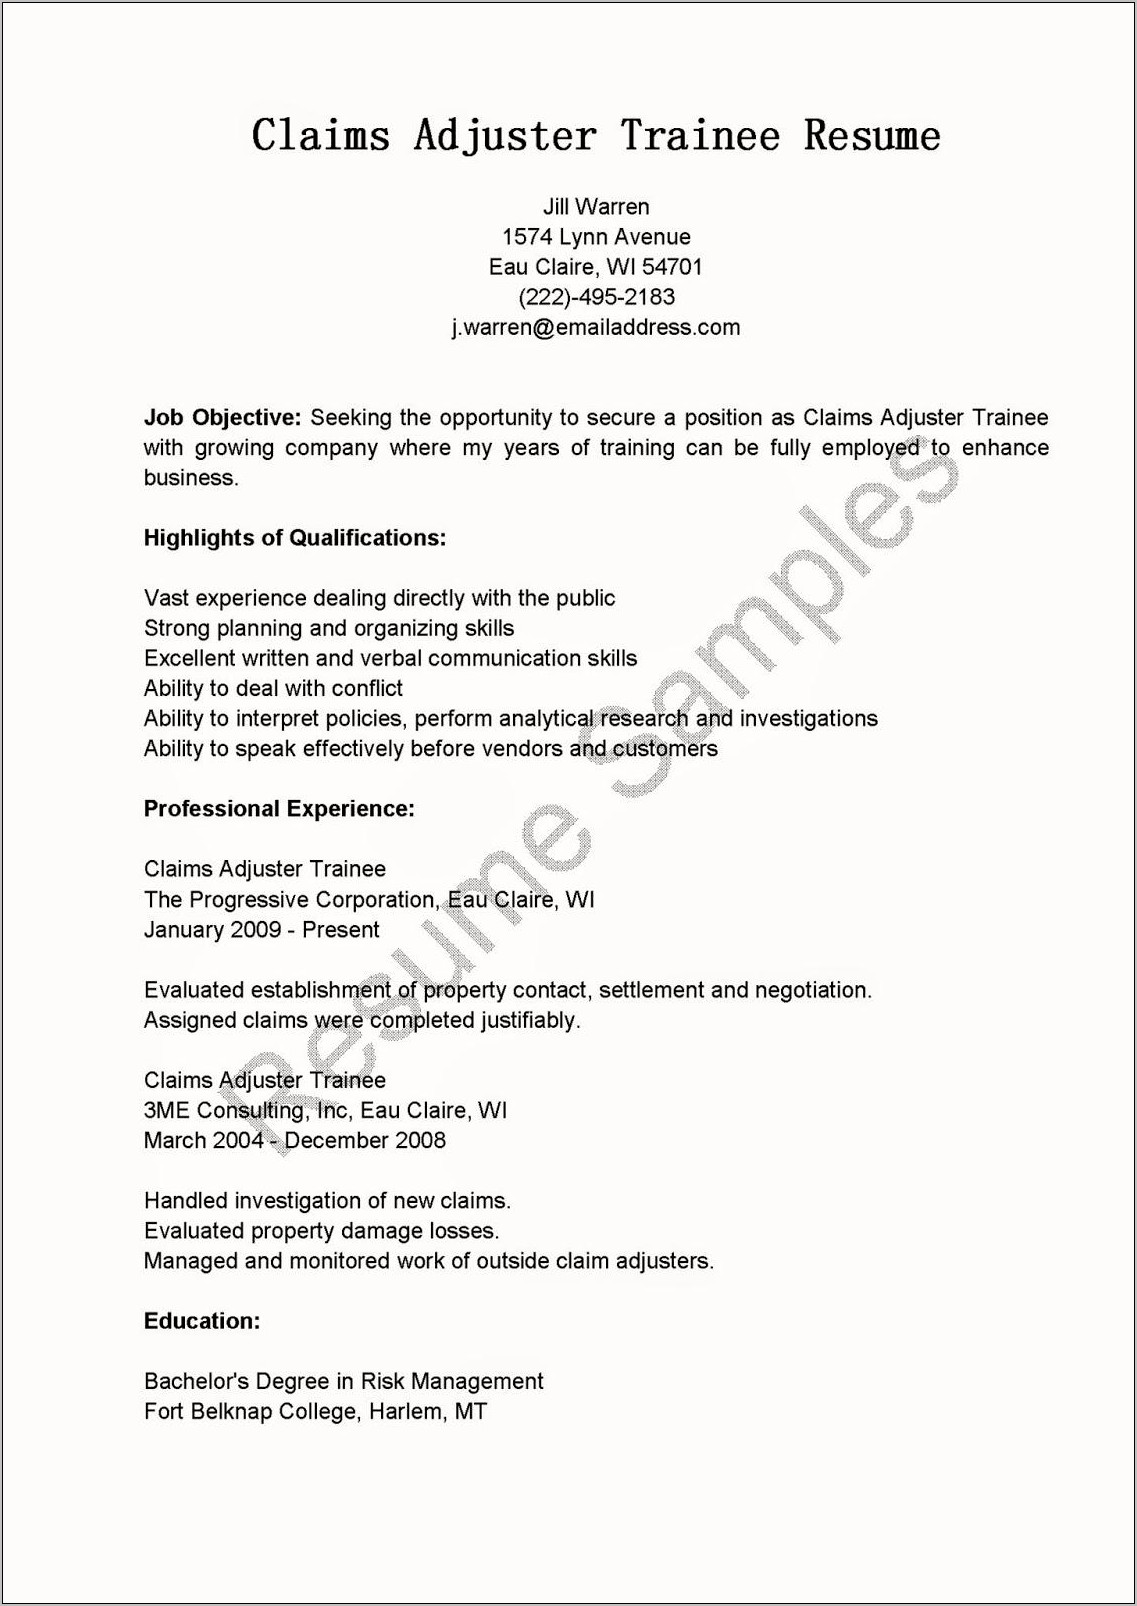 Claims Adjuster Trainee Resume Objective